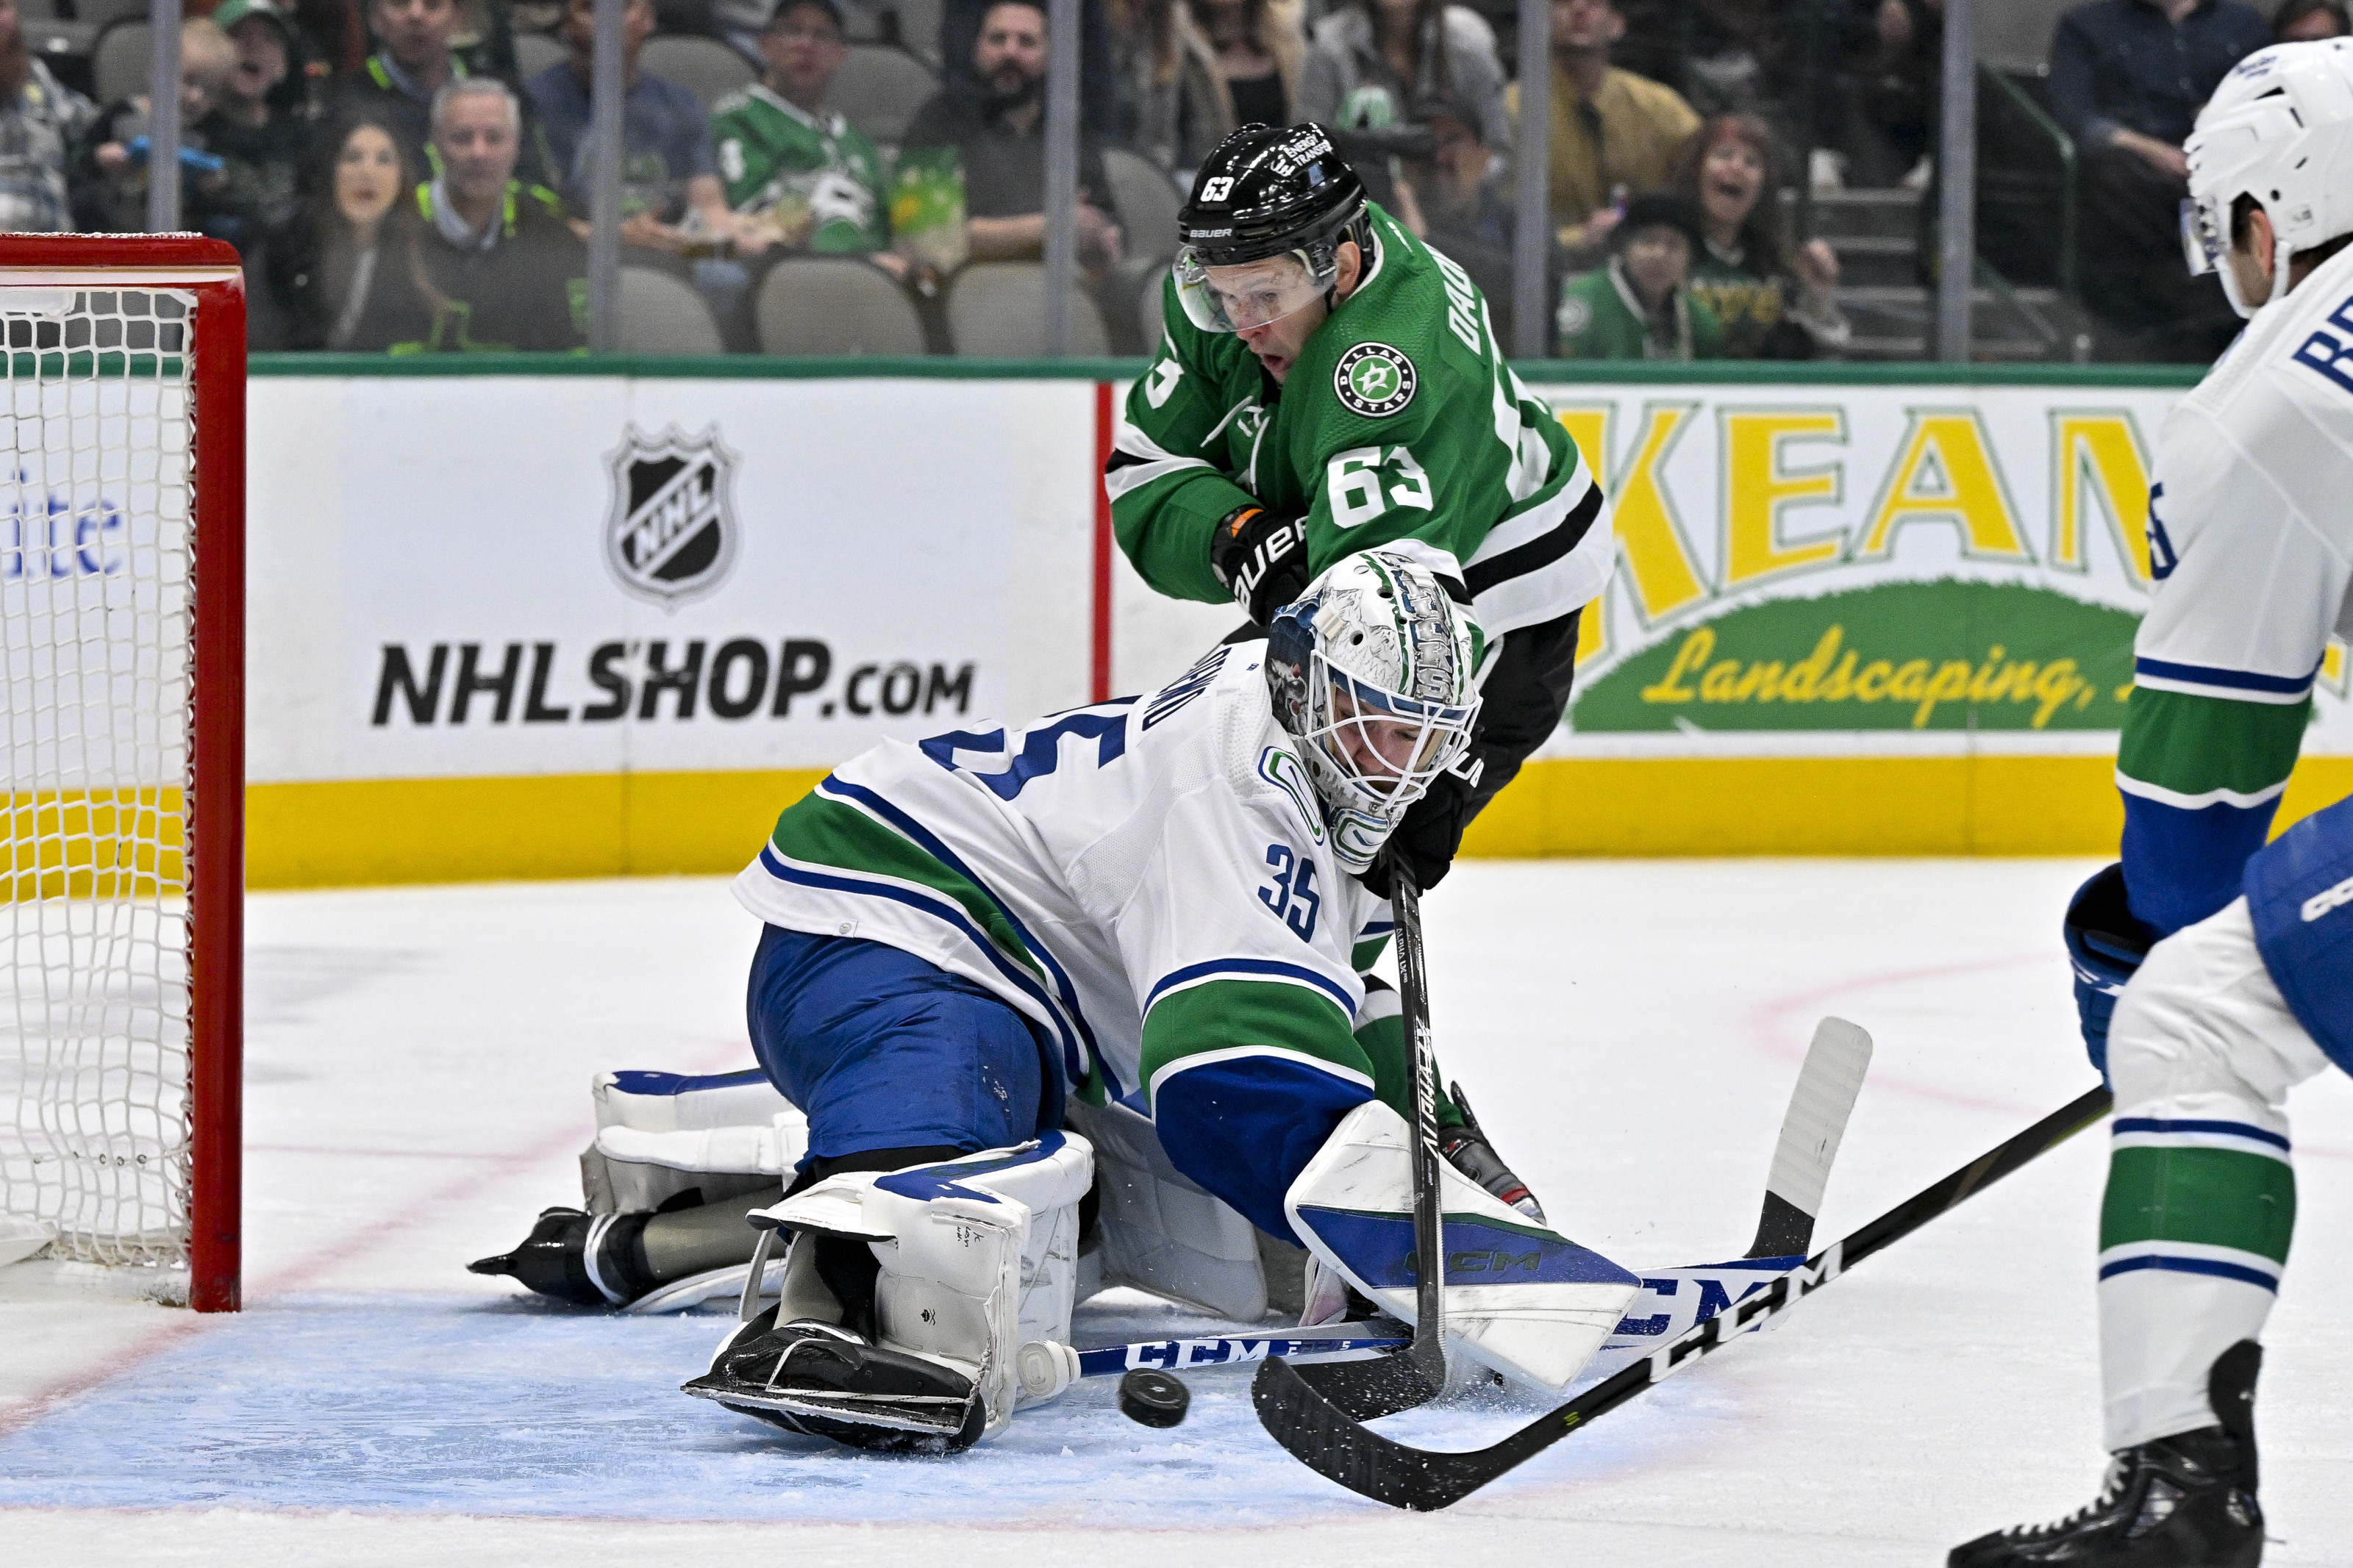 Canucks: Elias Pettersson is the star that Vancouver needs right now